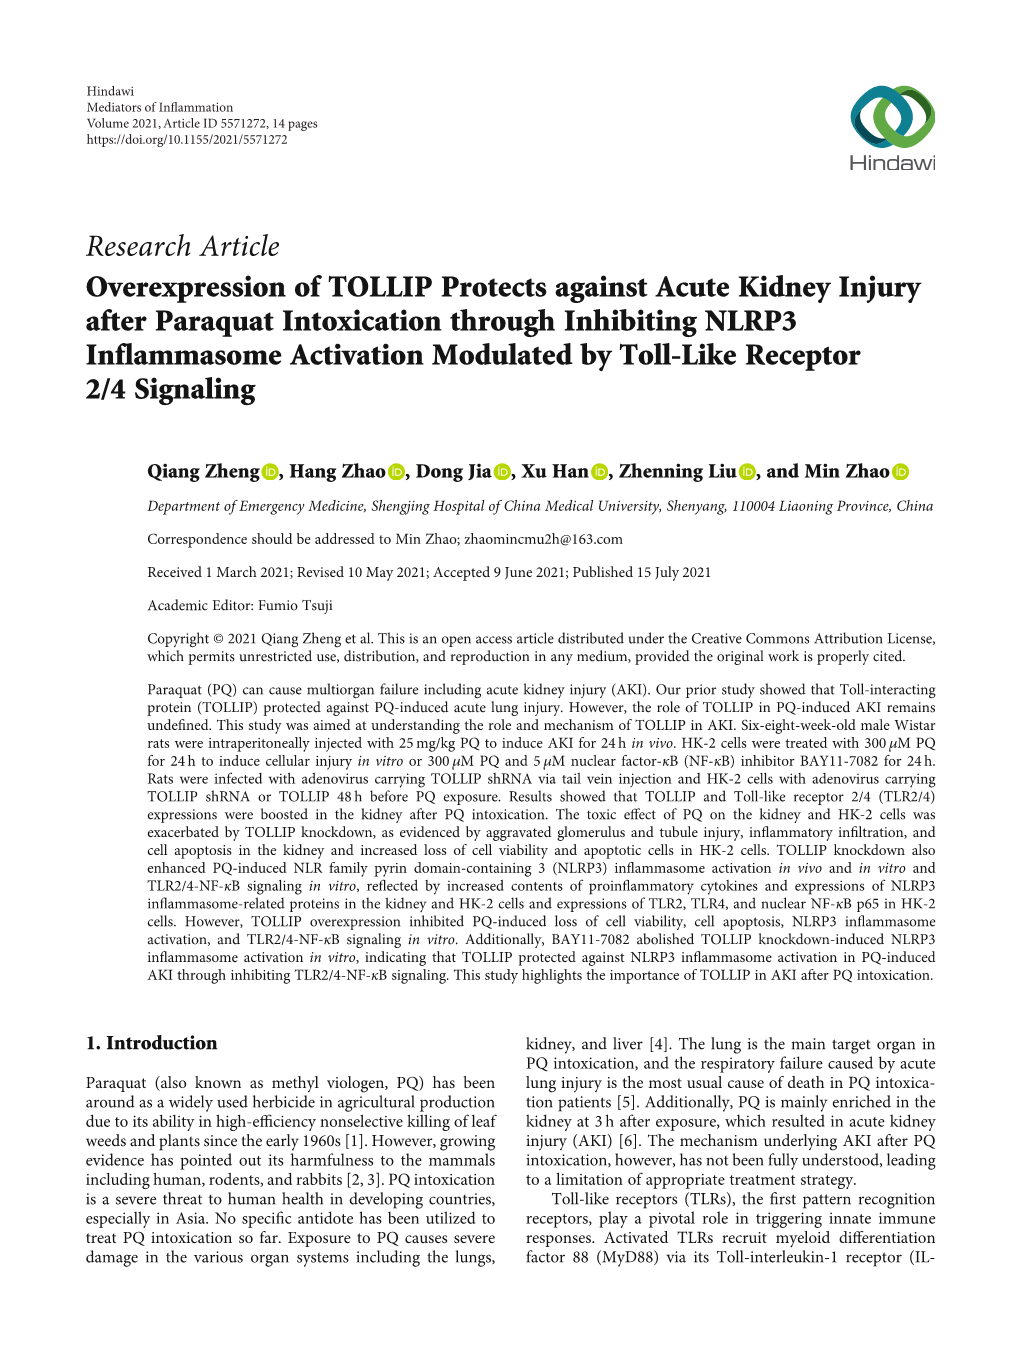 Research Article Overexpression of TOLLIP Protects